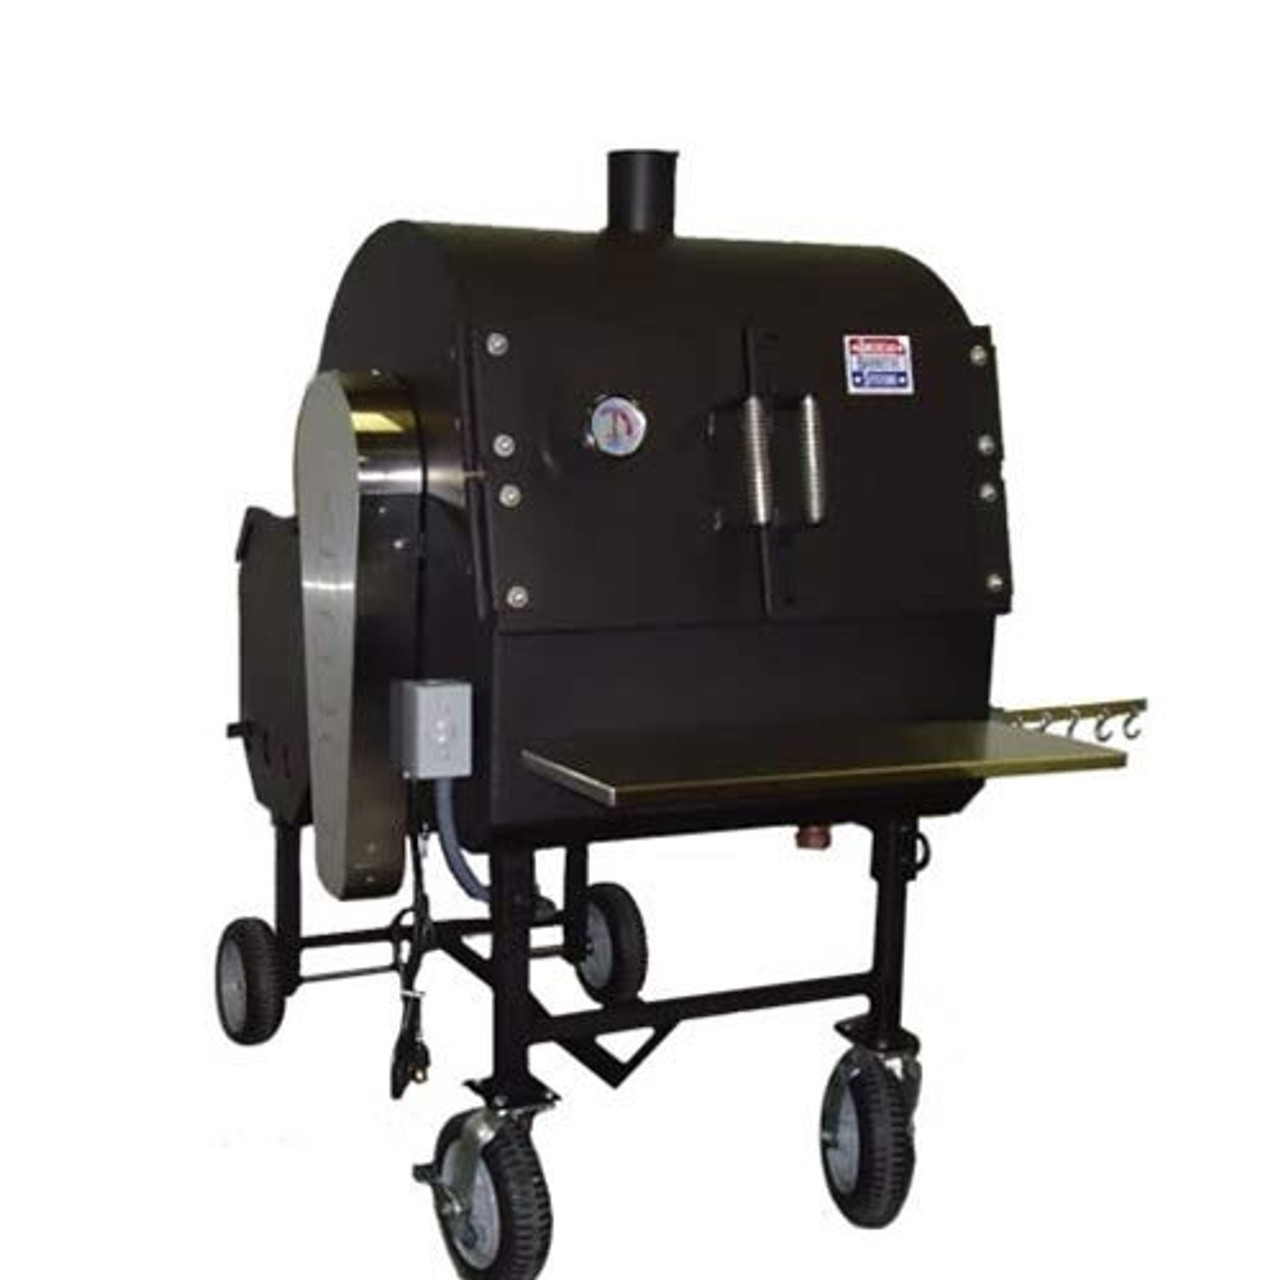 Pit Boss' vertical electric smoker makes homemade BBQ easy at 2023